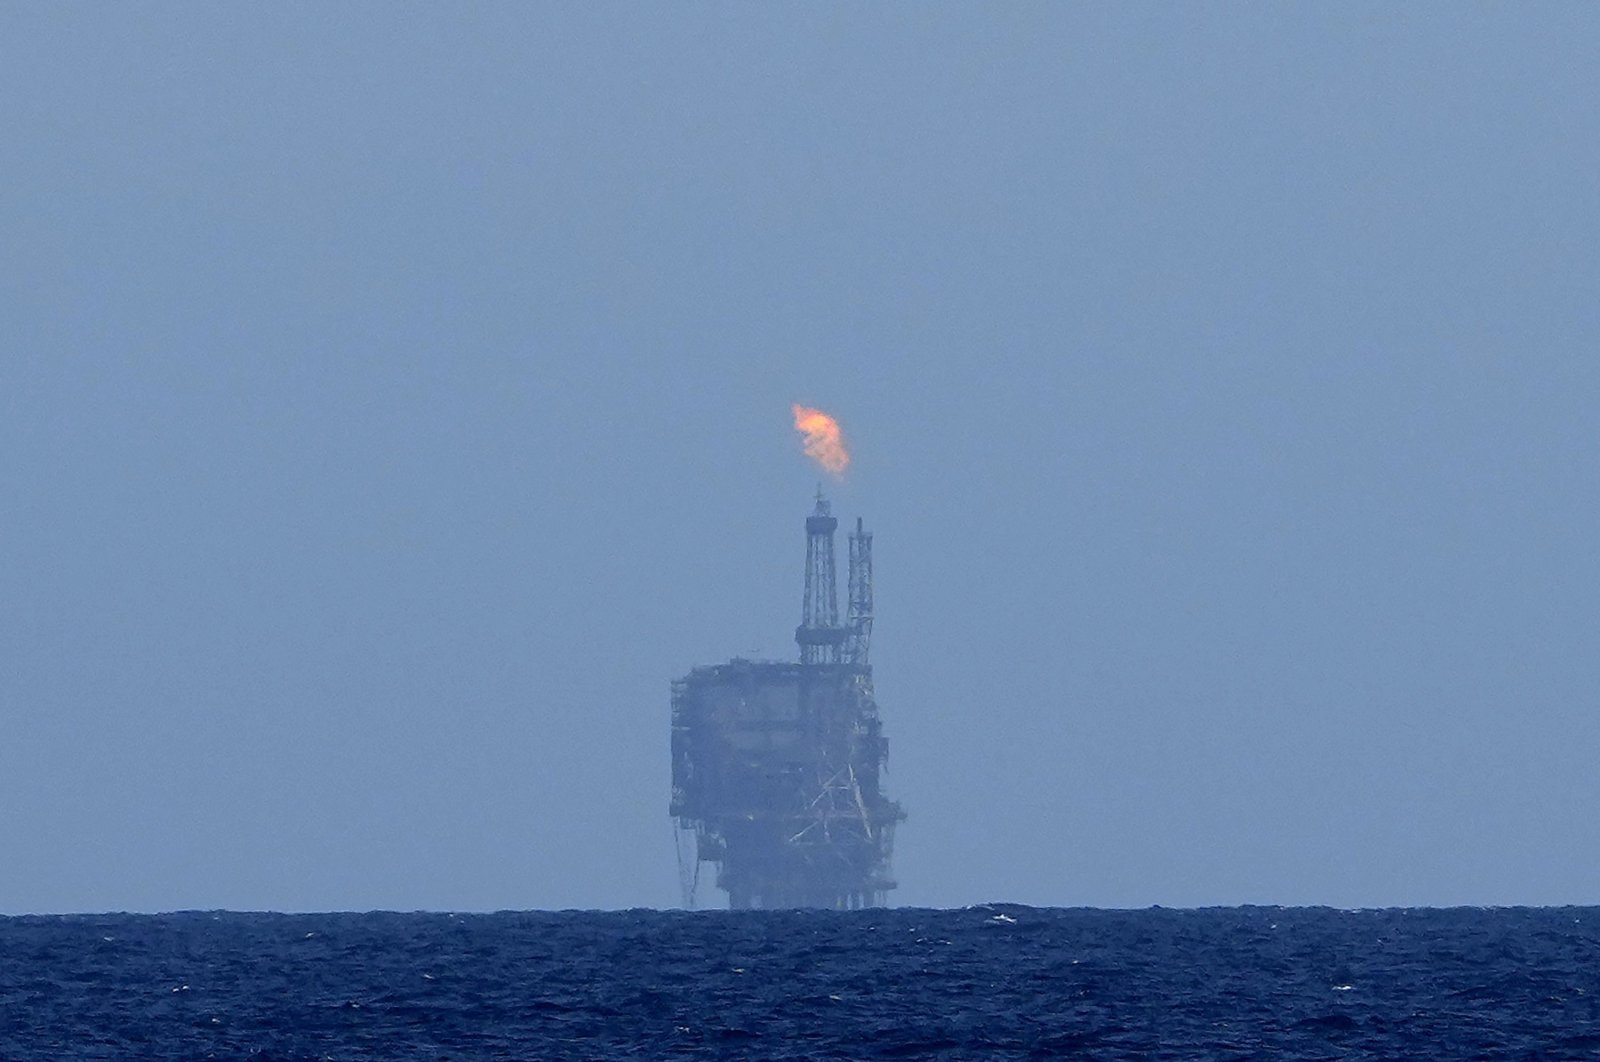 An oil platform is visible on the horizon in the international waters zone near Libya in the Mediterranean Sea, Sept. 17, 2022. (AP Photo)
